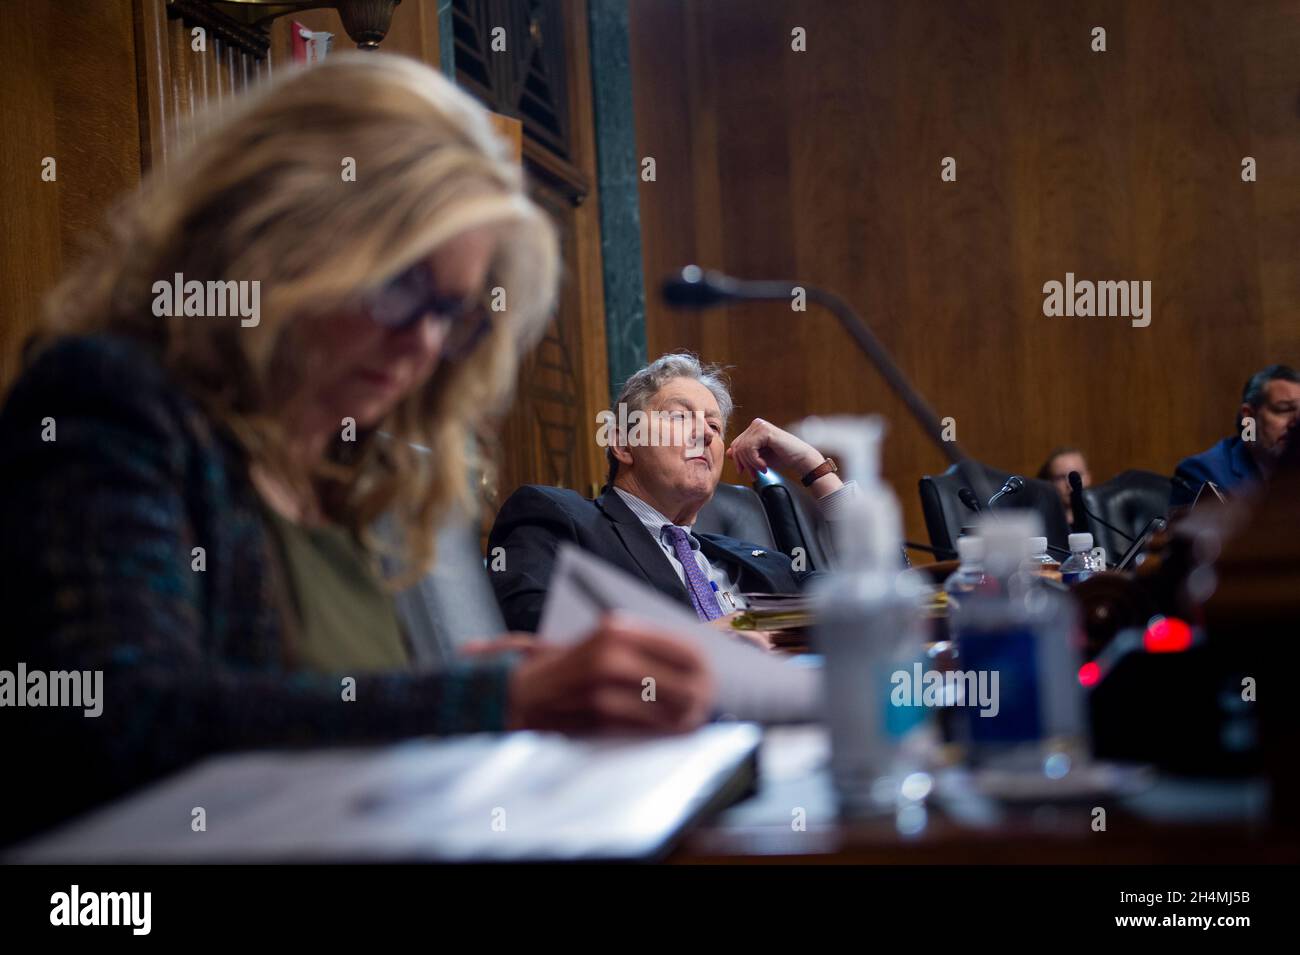 Washington, United States Of America. 03rd Nov, 2021. United States Senator Marsha Blackburn (Republican of Tennessee), left, and United States Senator John Neely Kennedy (Republican of Louisiana), right, listen while United States Senator Ted Cruz (Republican of Texas) questions Gabriel P. Sanchez during a Senate Committee on the Judiciary hearing for his nomination to be United States Circuit Judge for the Ninth Circuit, in the Dirksen Senate Office Building in Washington, DC, Wednesday, November 3, 2021. Credit: Rod Lamkey/CNP/Sipa USA Credit: Sipa USA/Alamy Live News Stock Photo